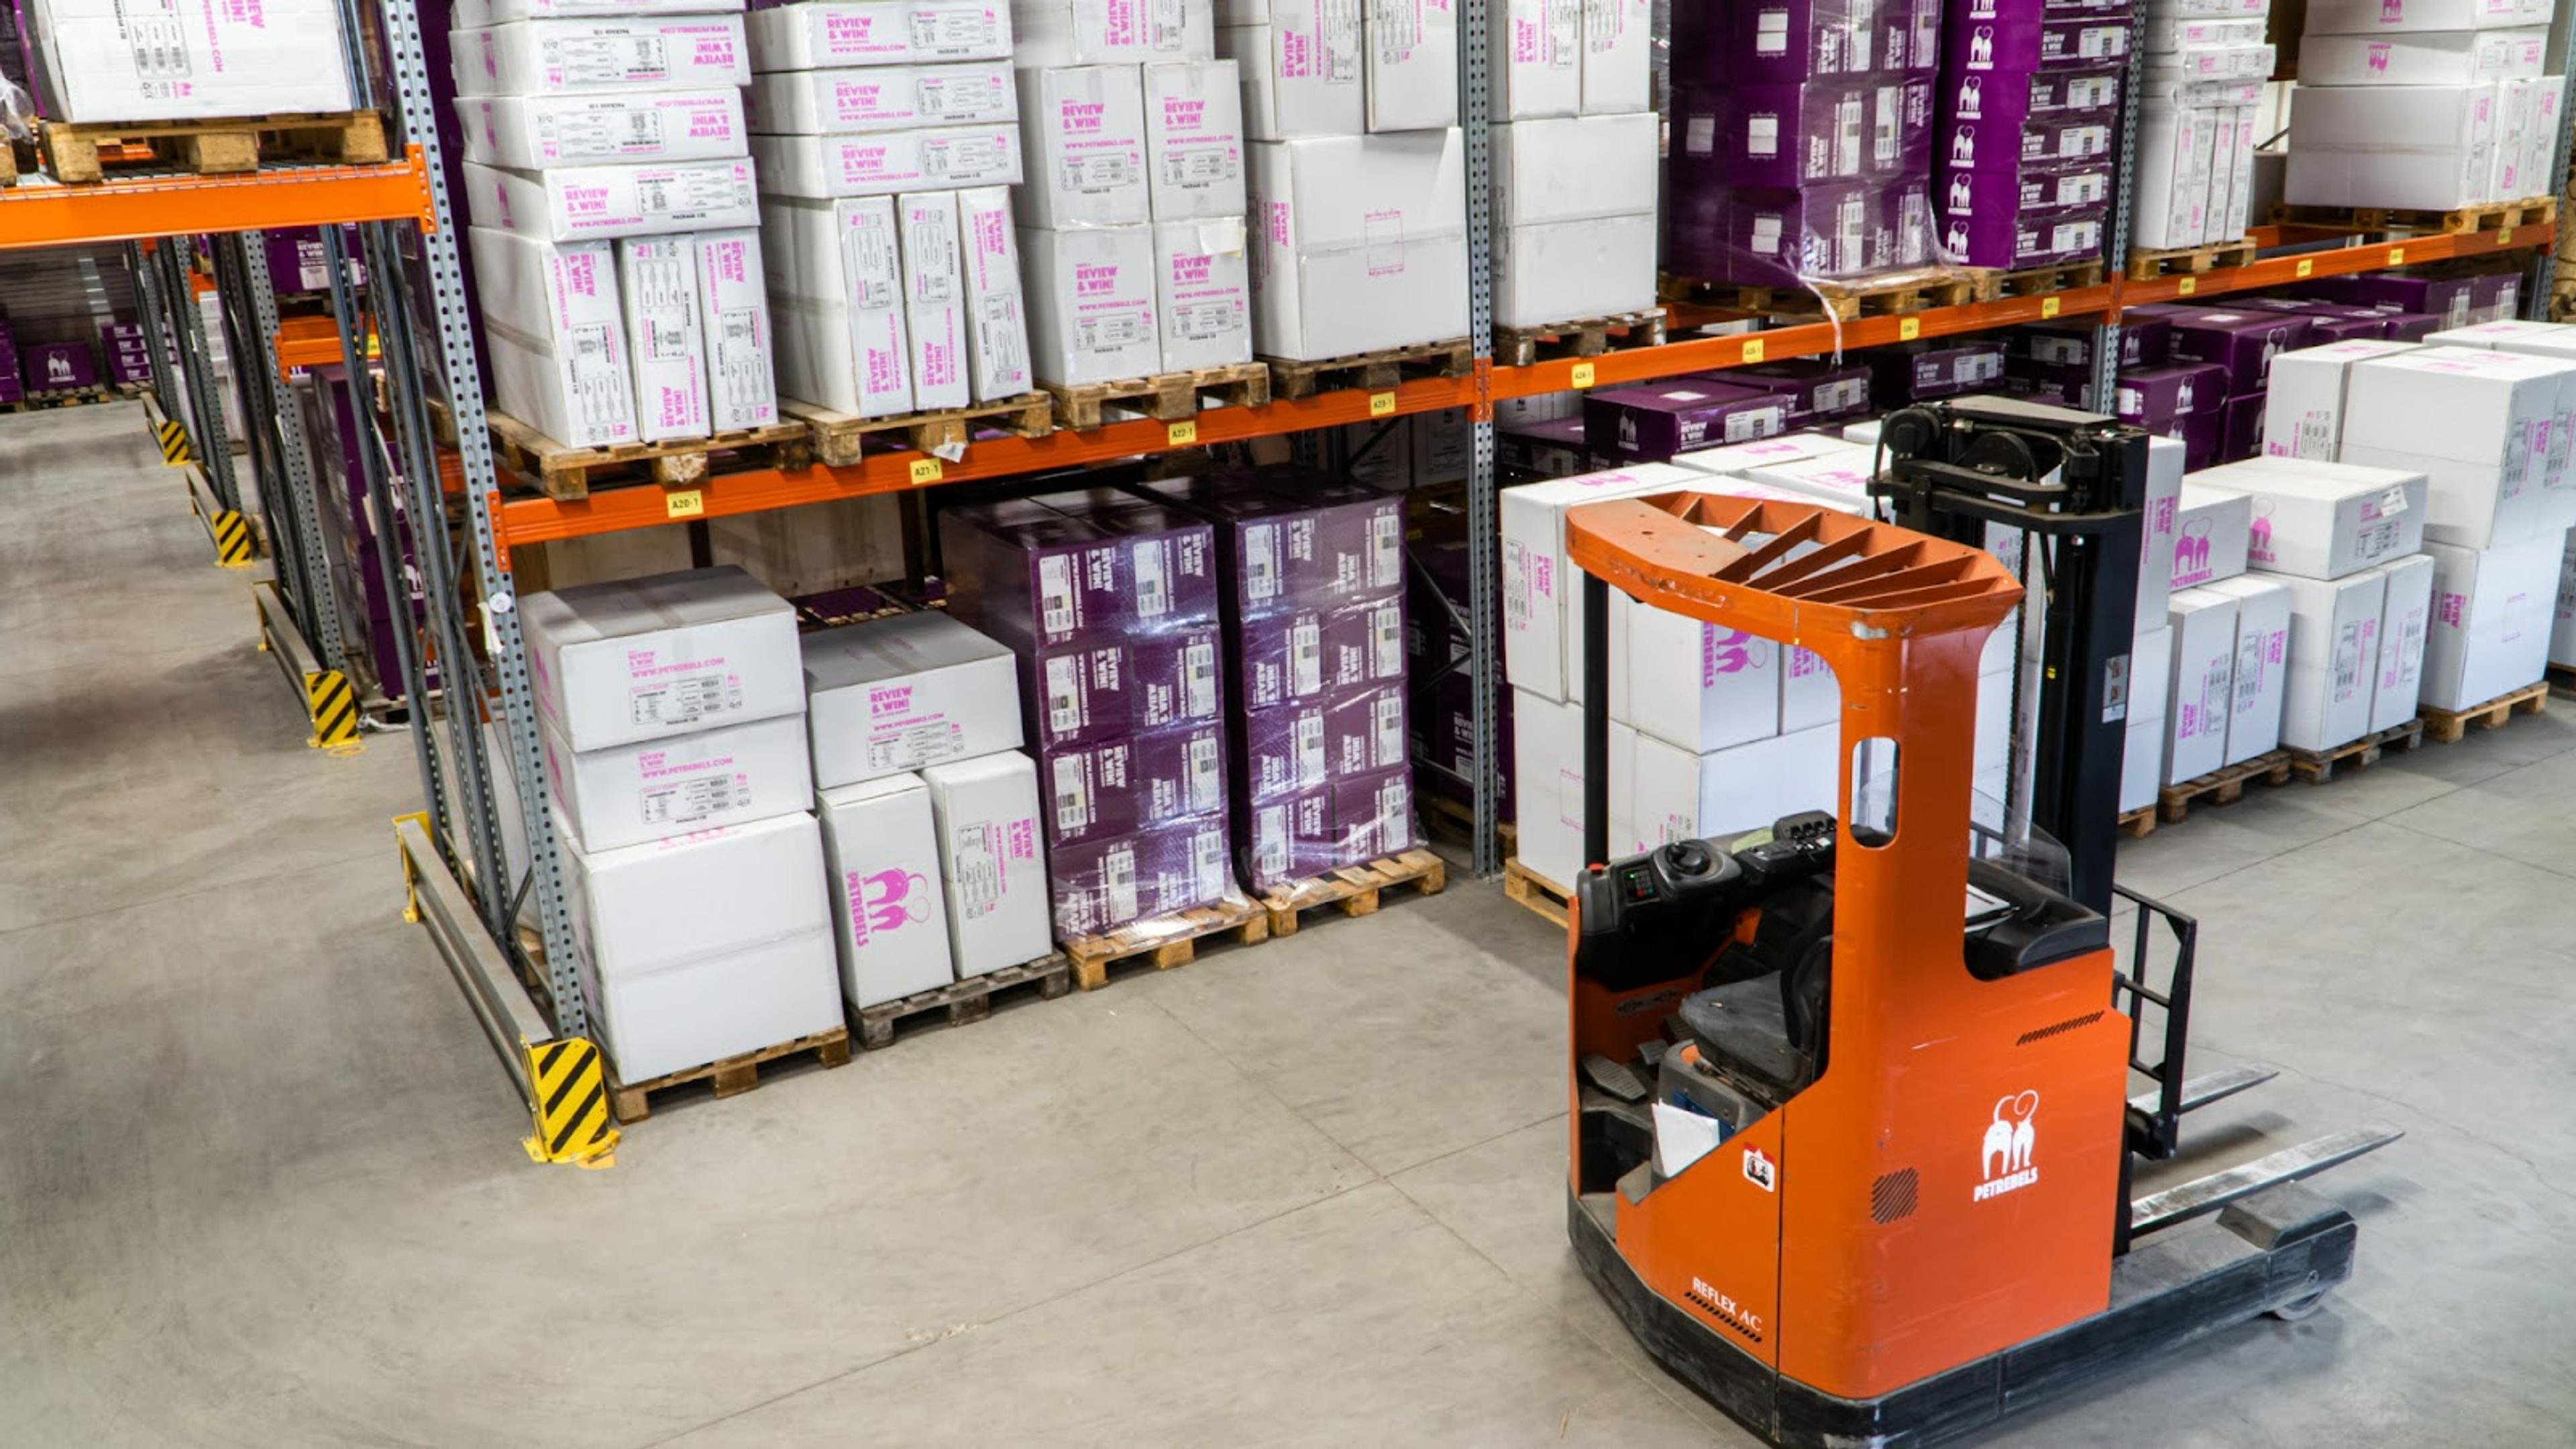 What Makes a Good Inventory Management System?